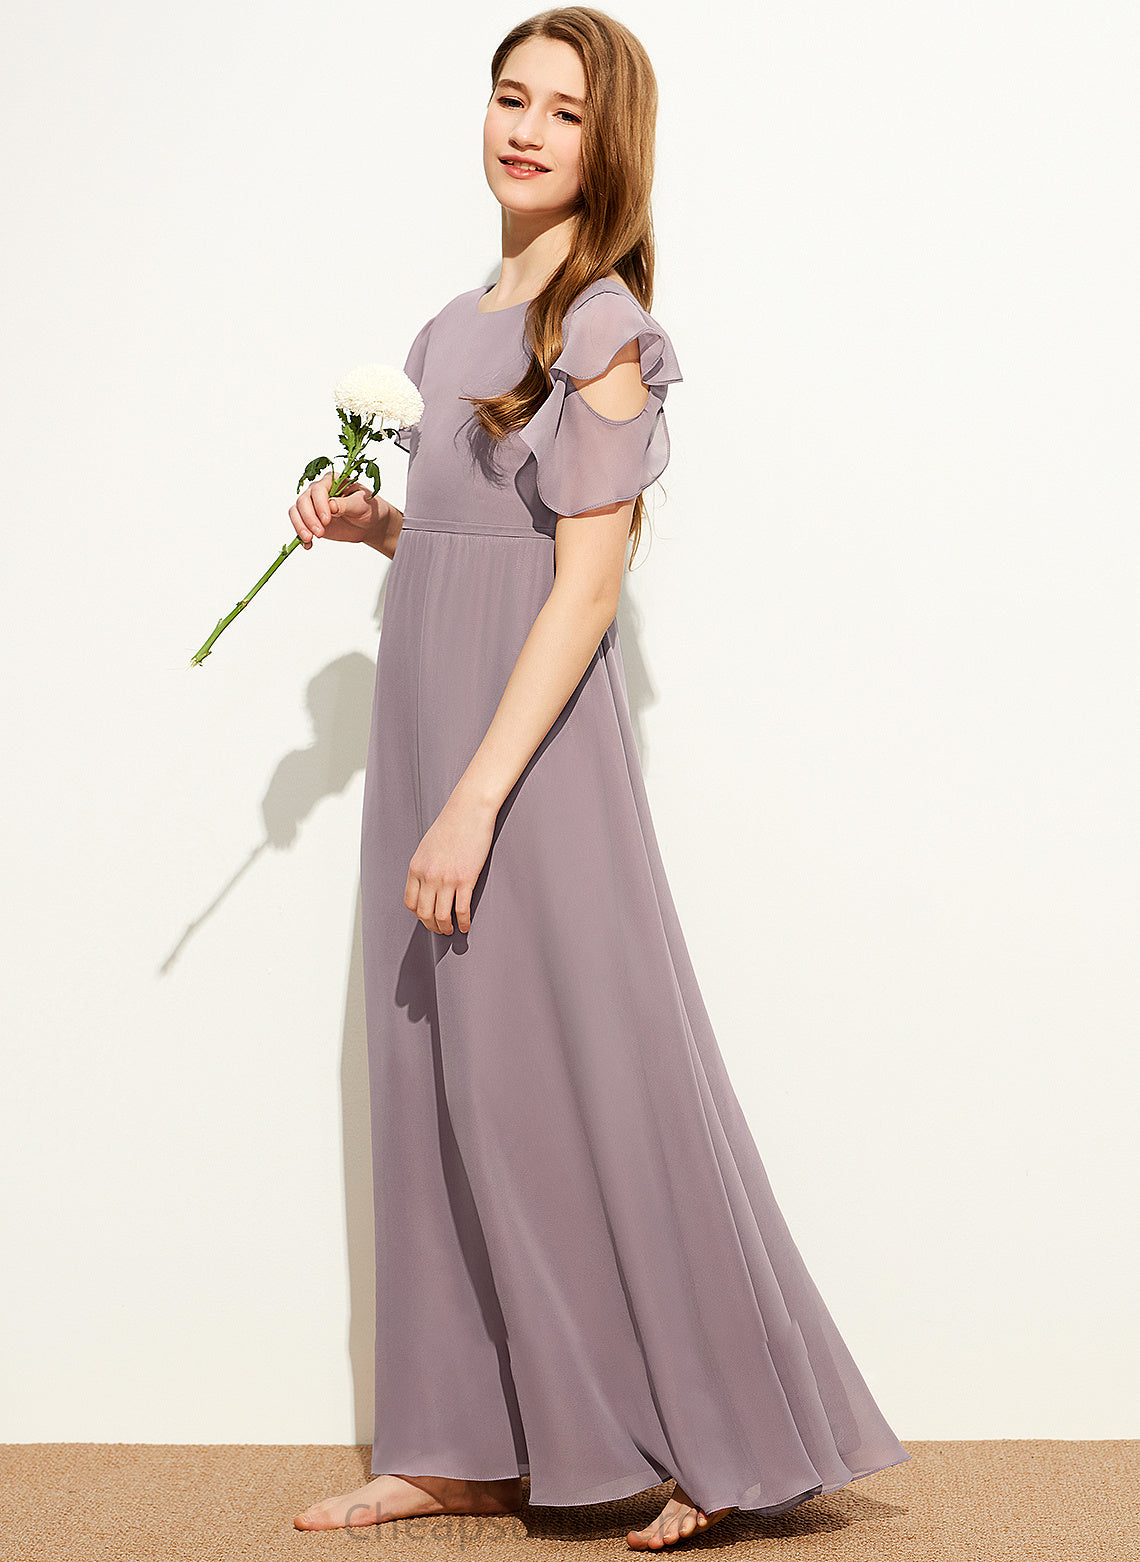 With Cascading Junior Bridesmaid Dresses Ruffles Justice A-Line Neck Floor-Length Scoop Chiffon